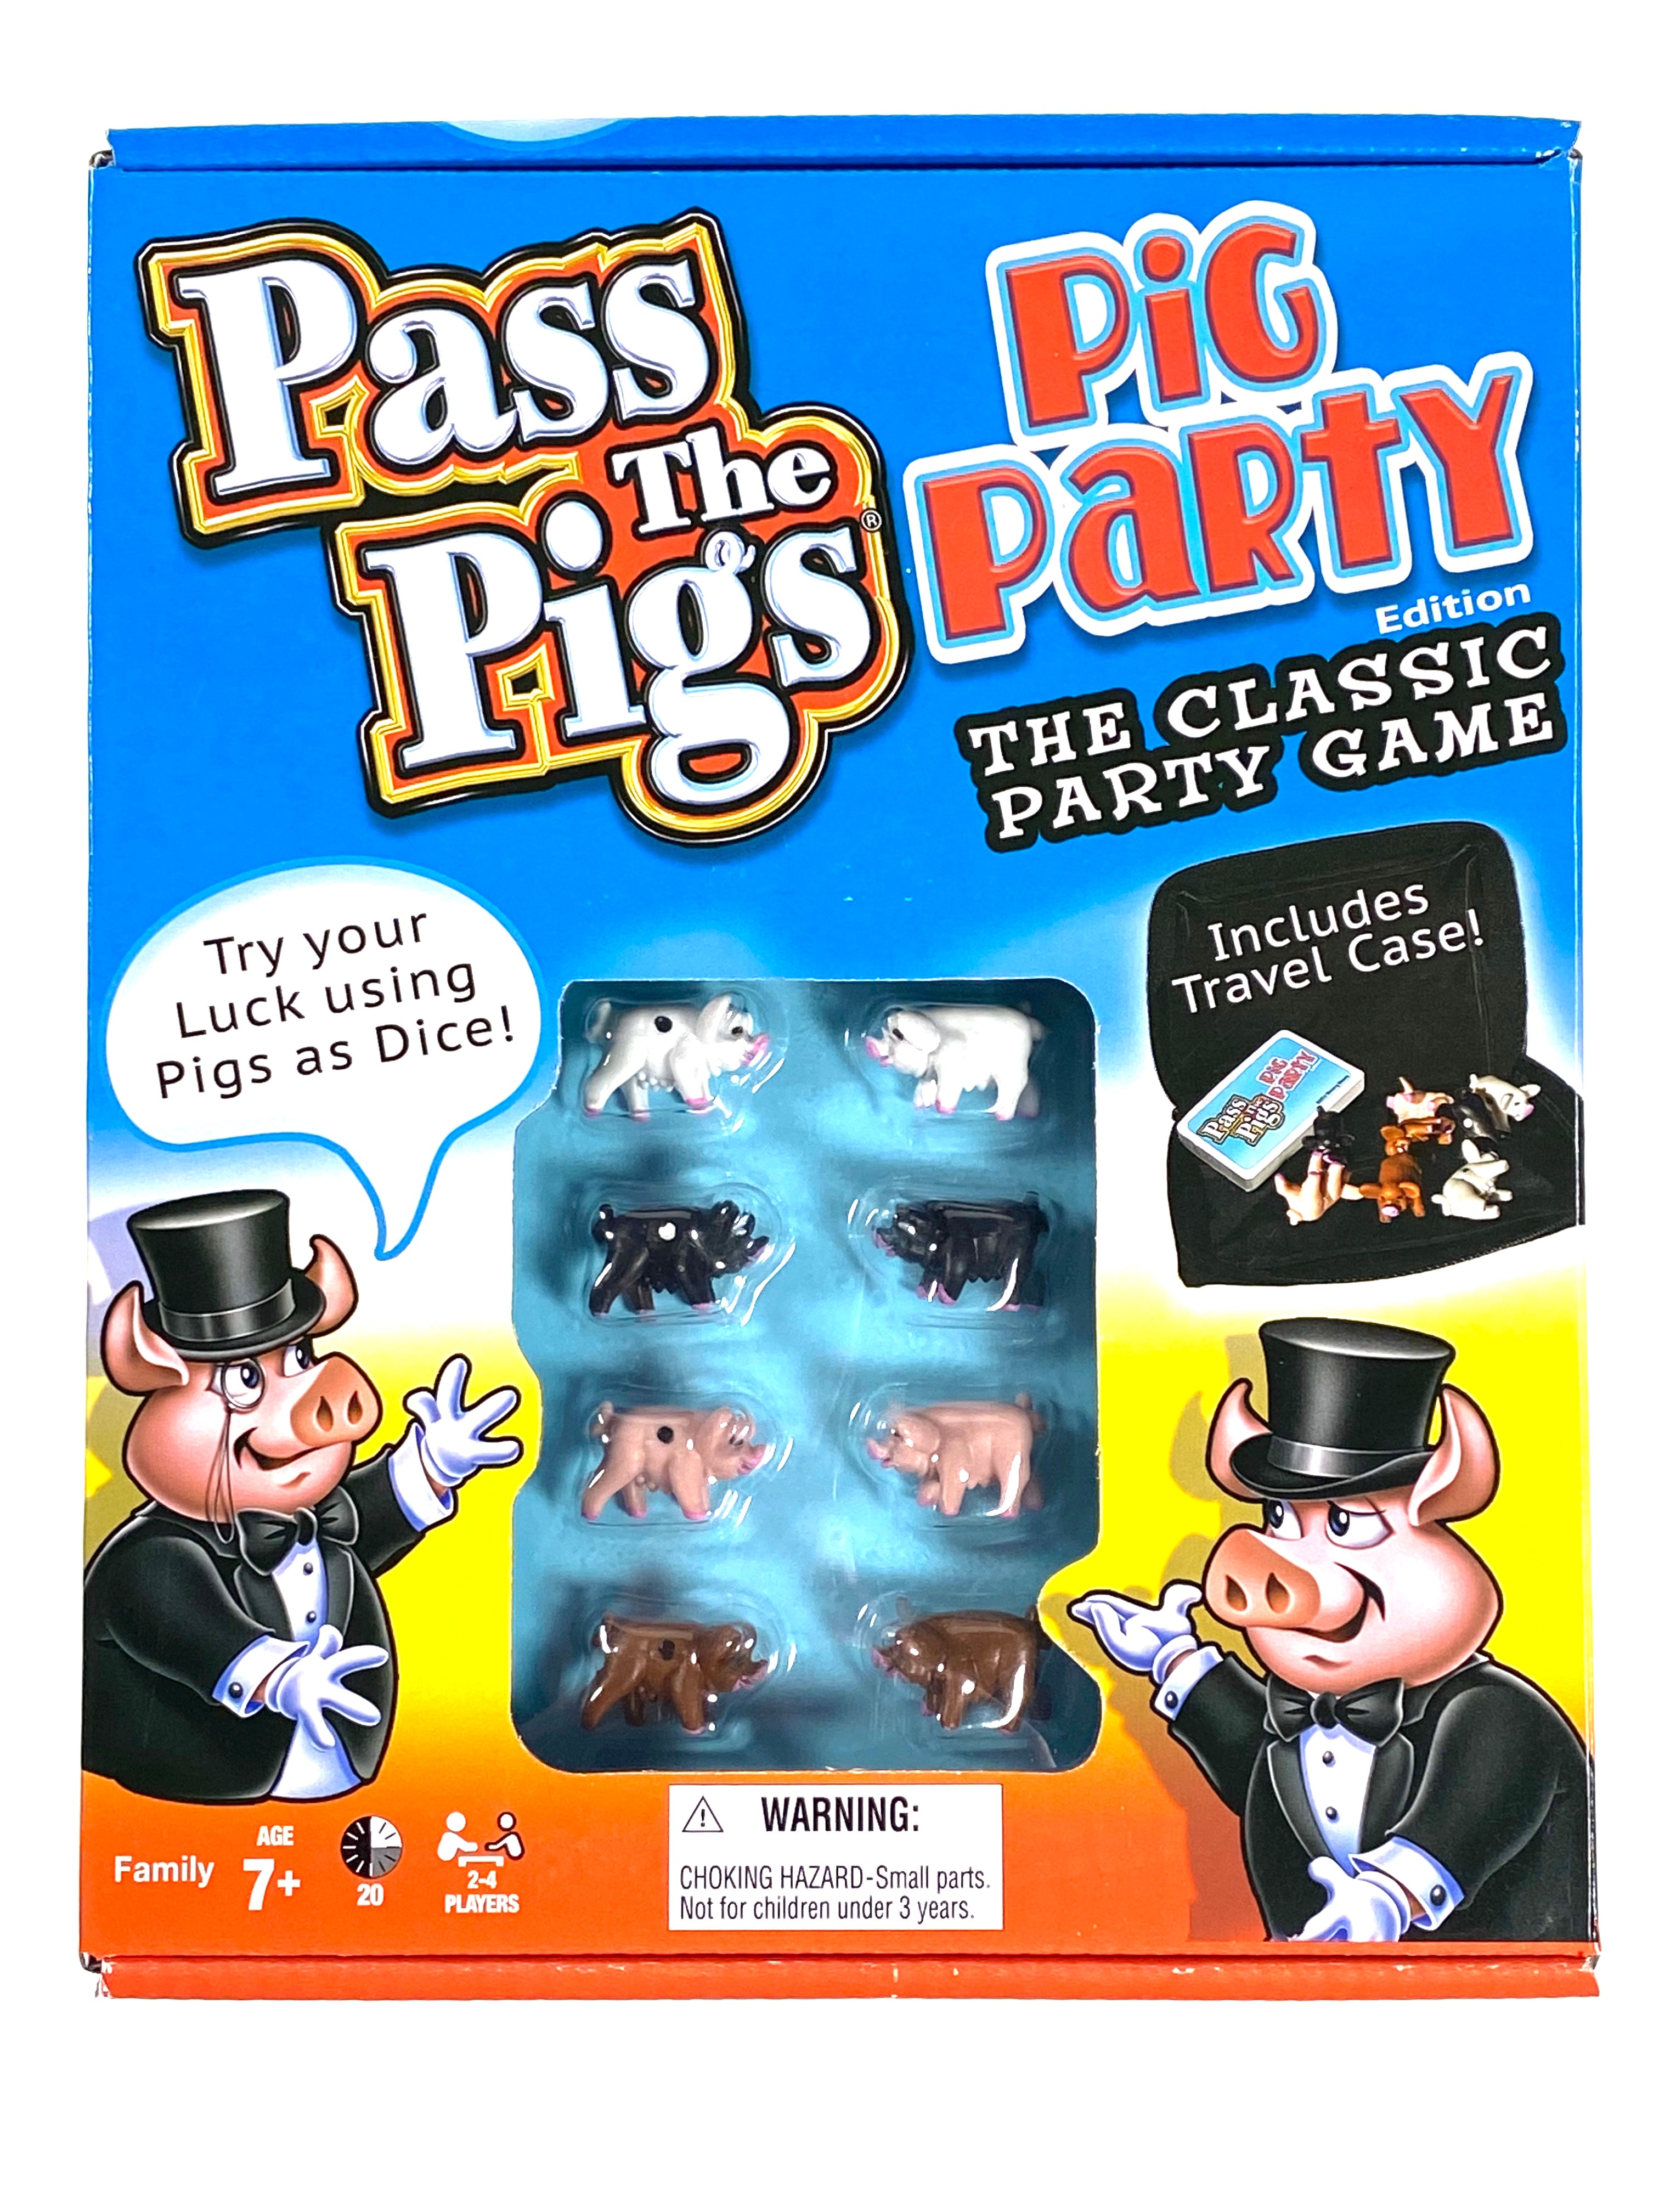 Buy Pass the Pugs Dice Game, the classic party and travel game